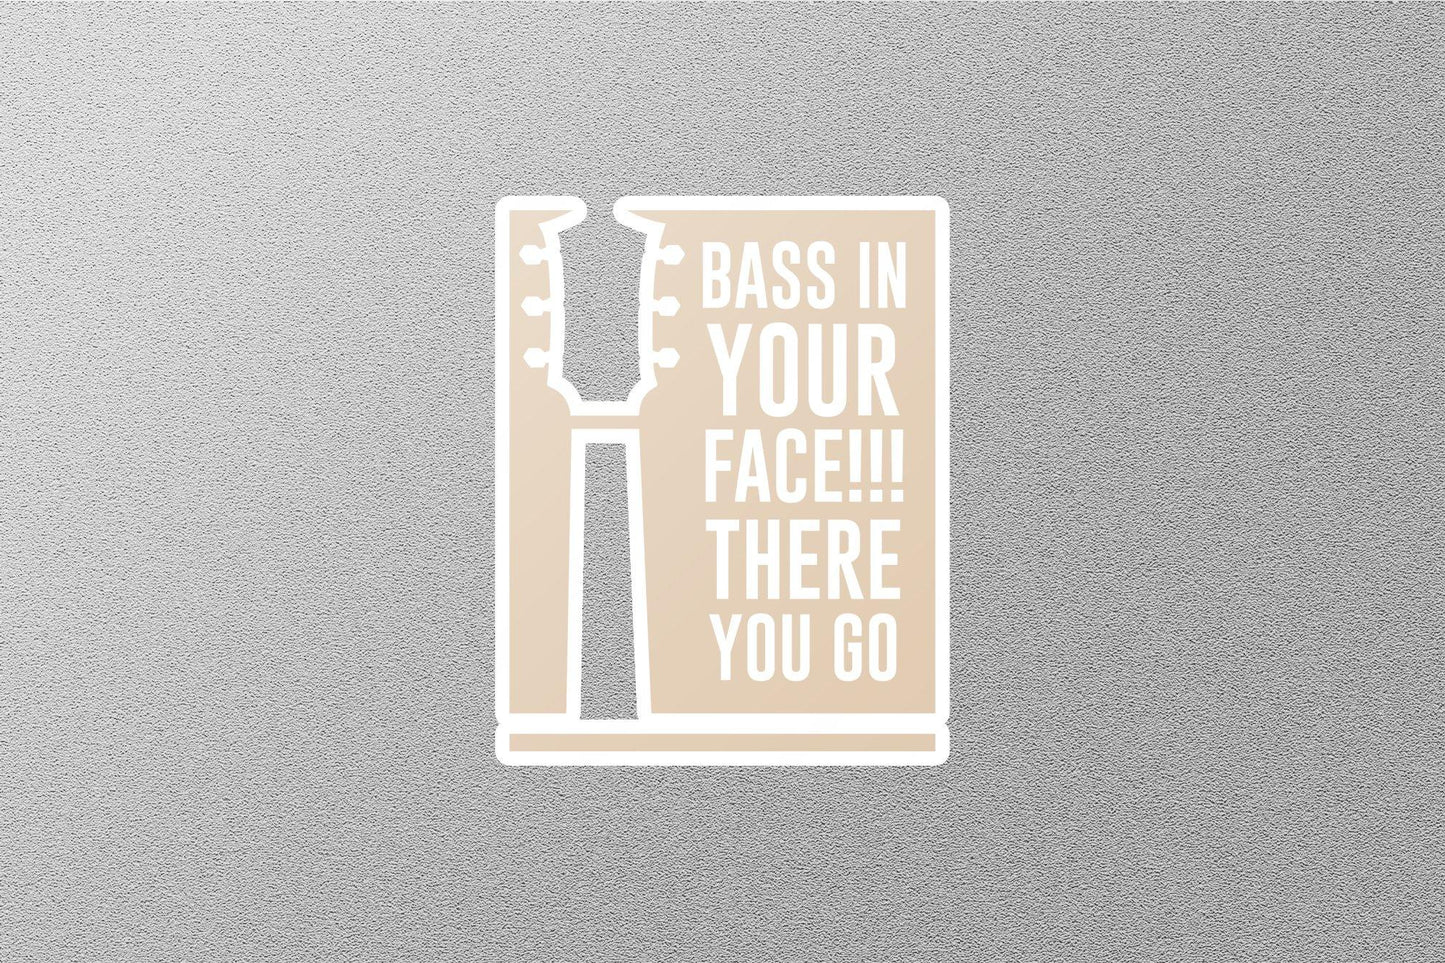 Bass On your Face There You Go Sticker